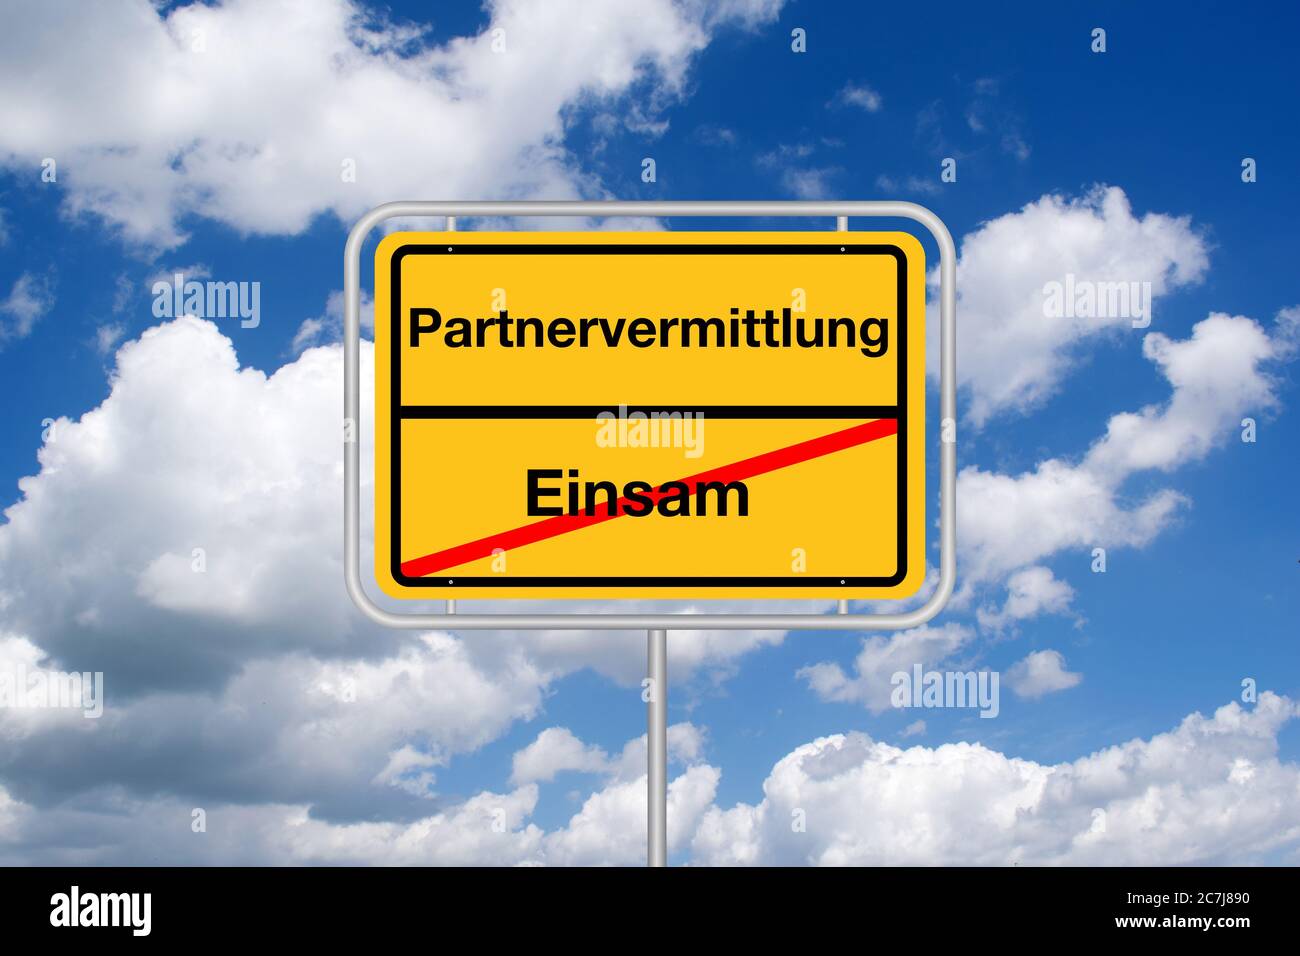 city limit sign Partnervermittlung - Einsam, dating agency - lomesome, Germany Stock Photo